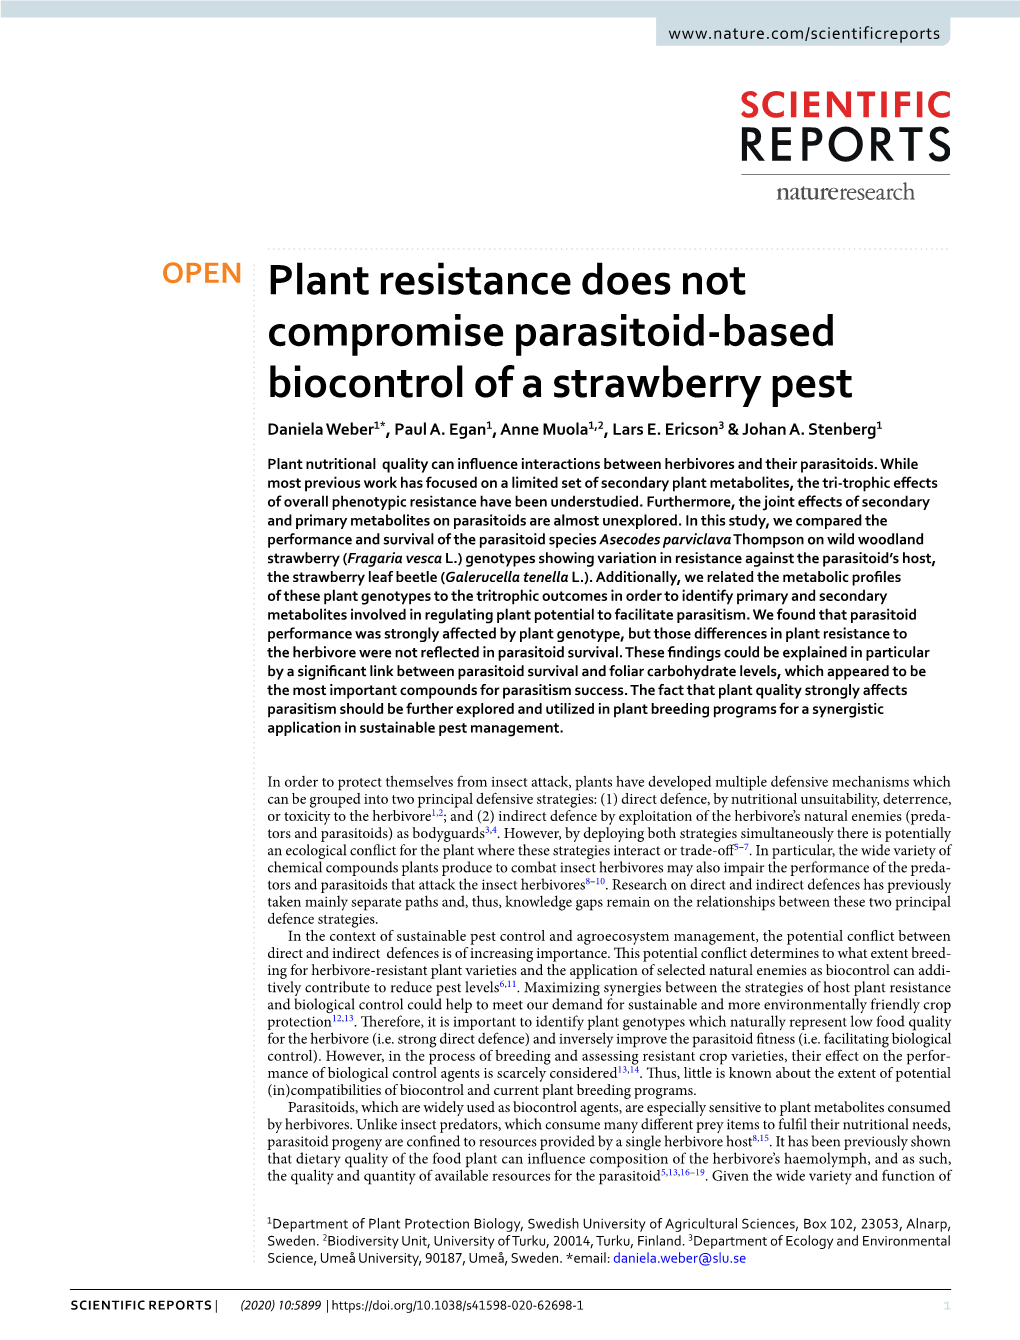 Plant Resistance Does Not Compromise Parasitoid-Based Biocontrol of a Strawberry Pest Daniela Weber1*, Paul A